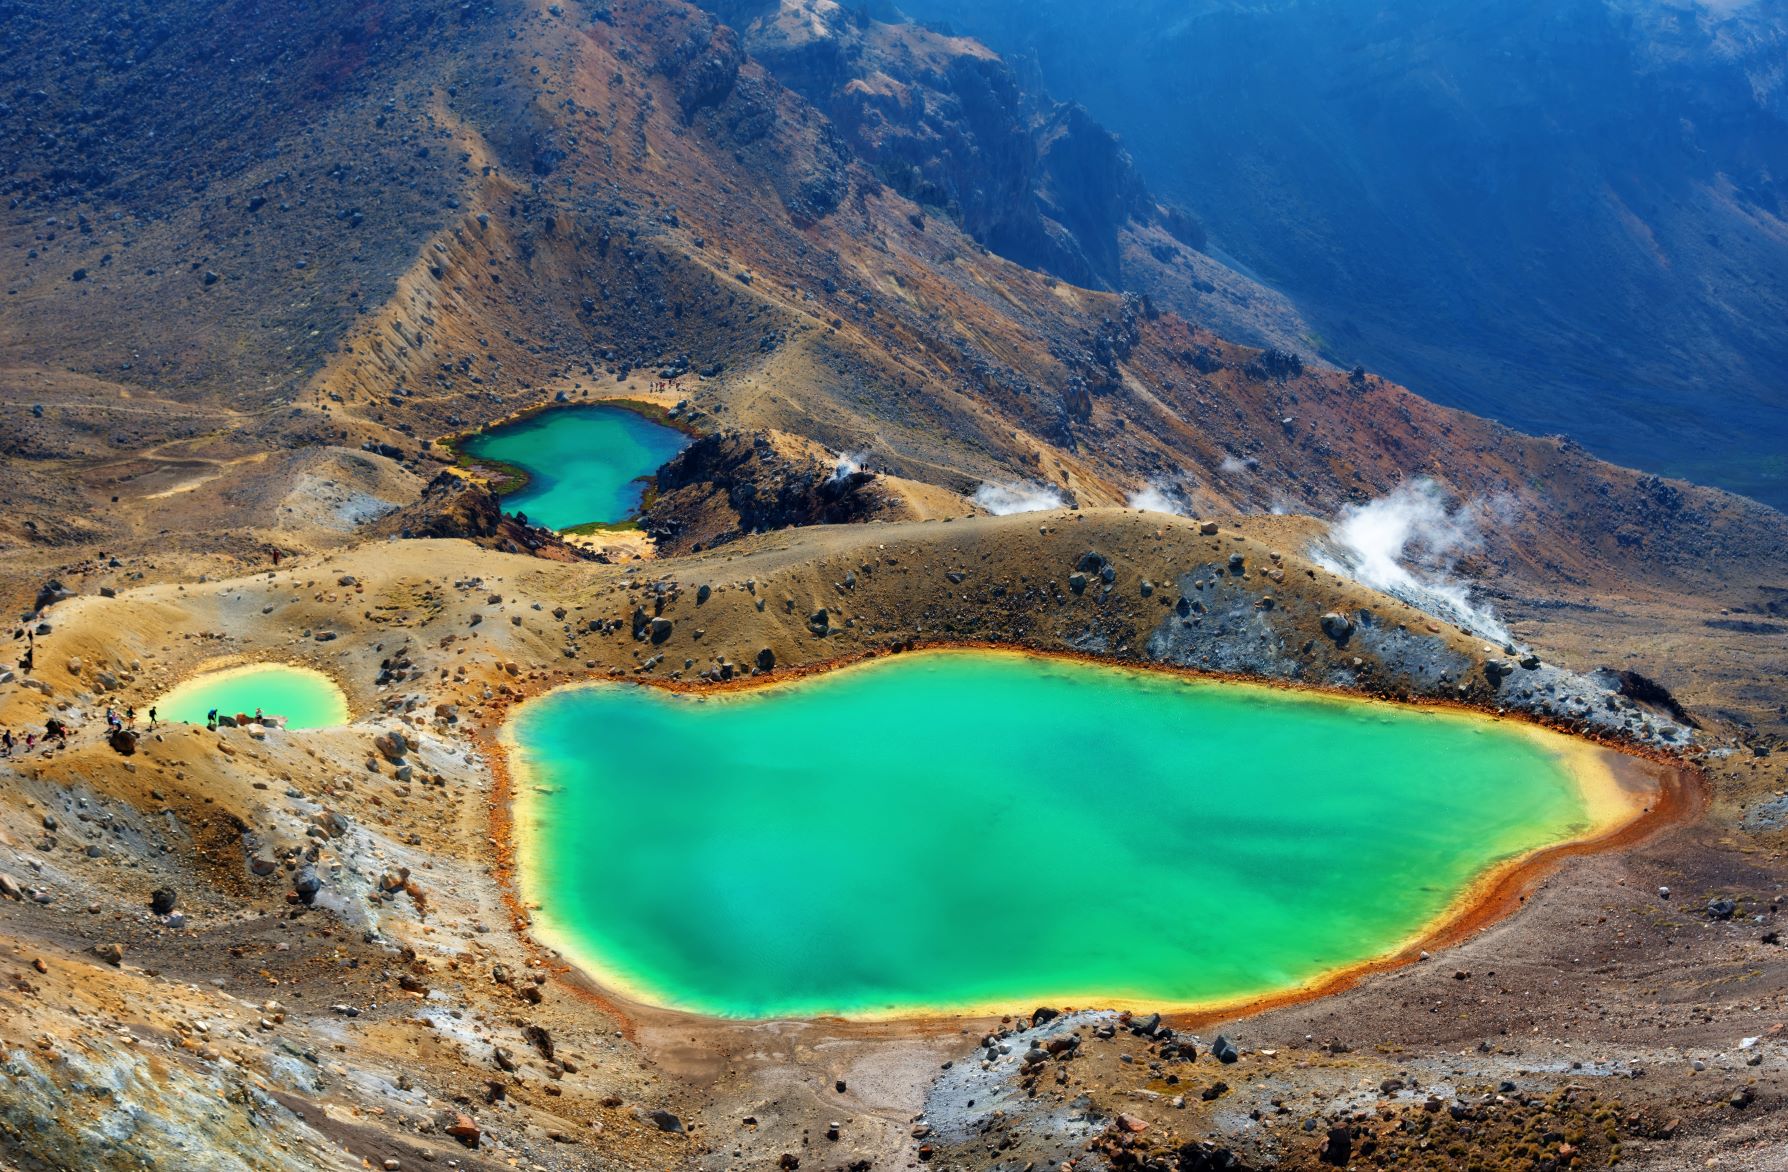 The Tongariro Alpine Crossing is the film locations and movie locations for Hunt for the Wilderpeople from Jaya Travel and Tours On Location blog series